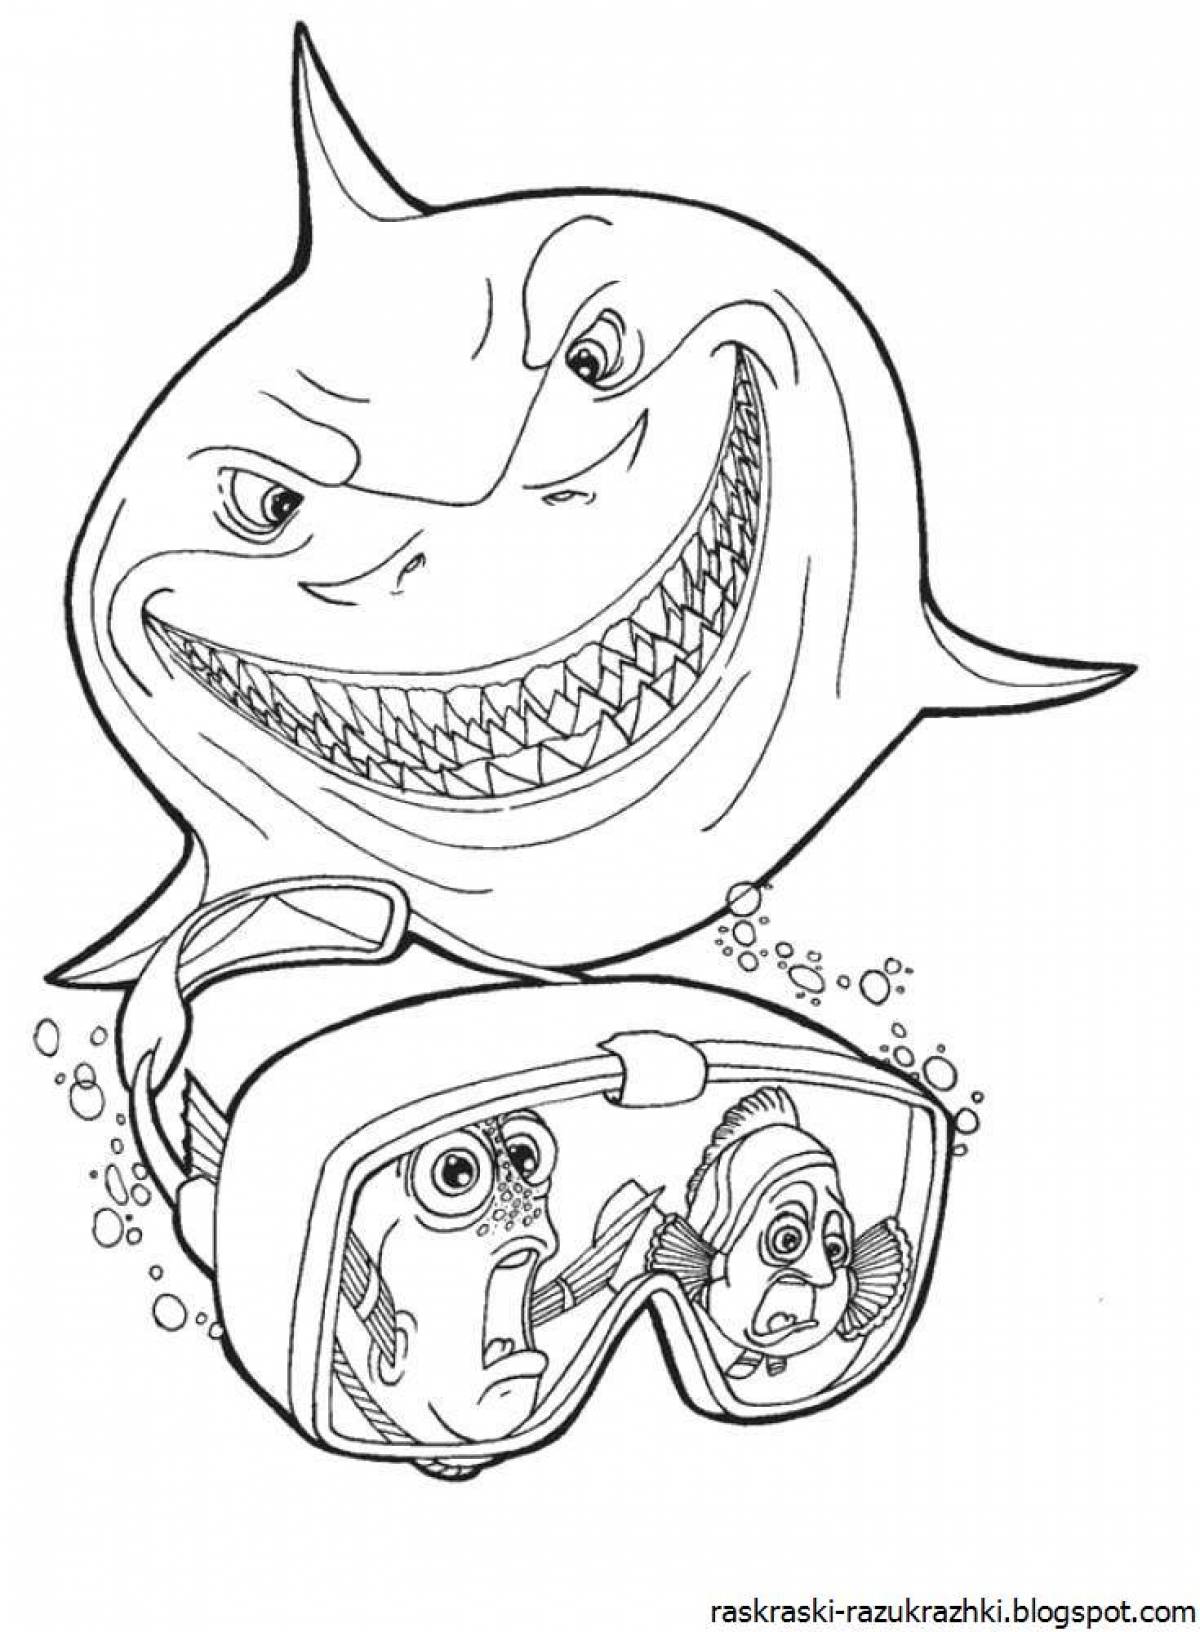 Amazing shark coloring page for kids